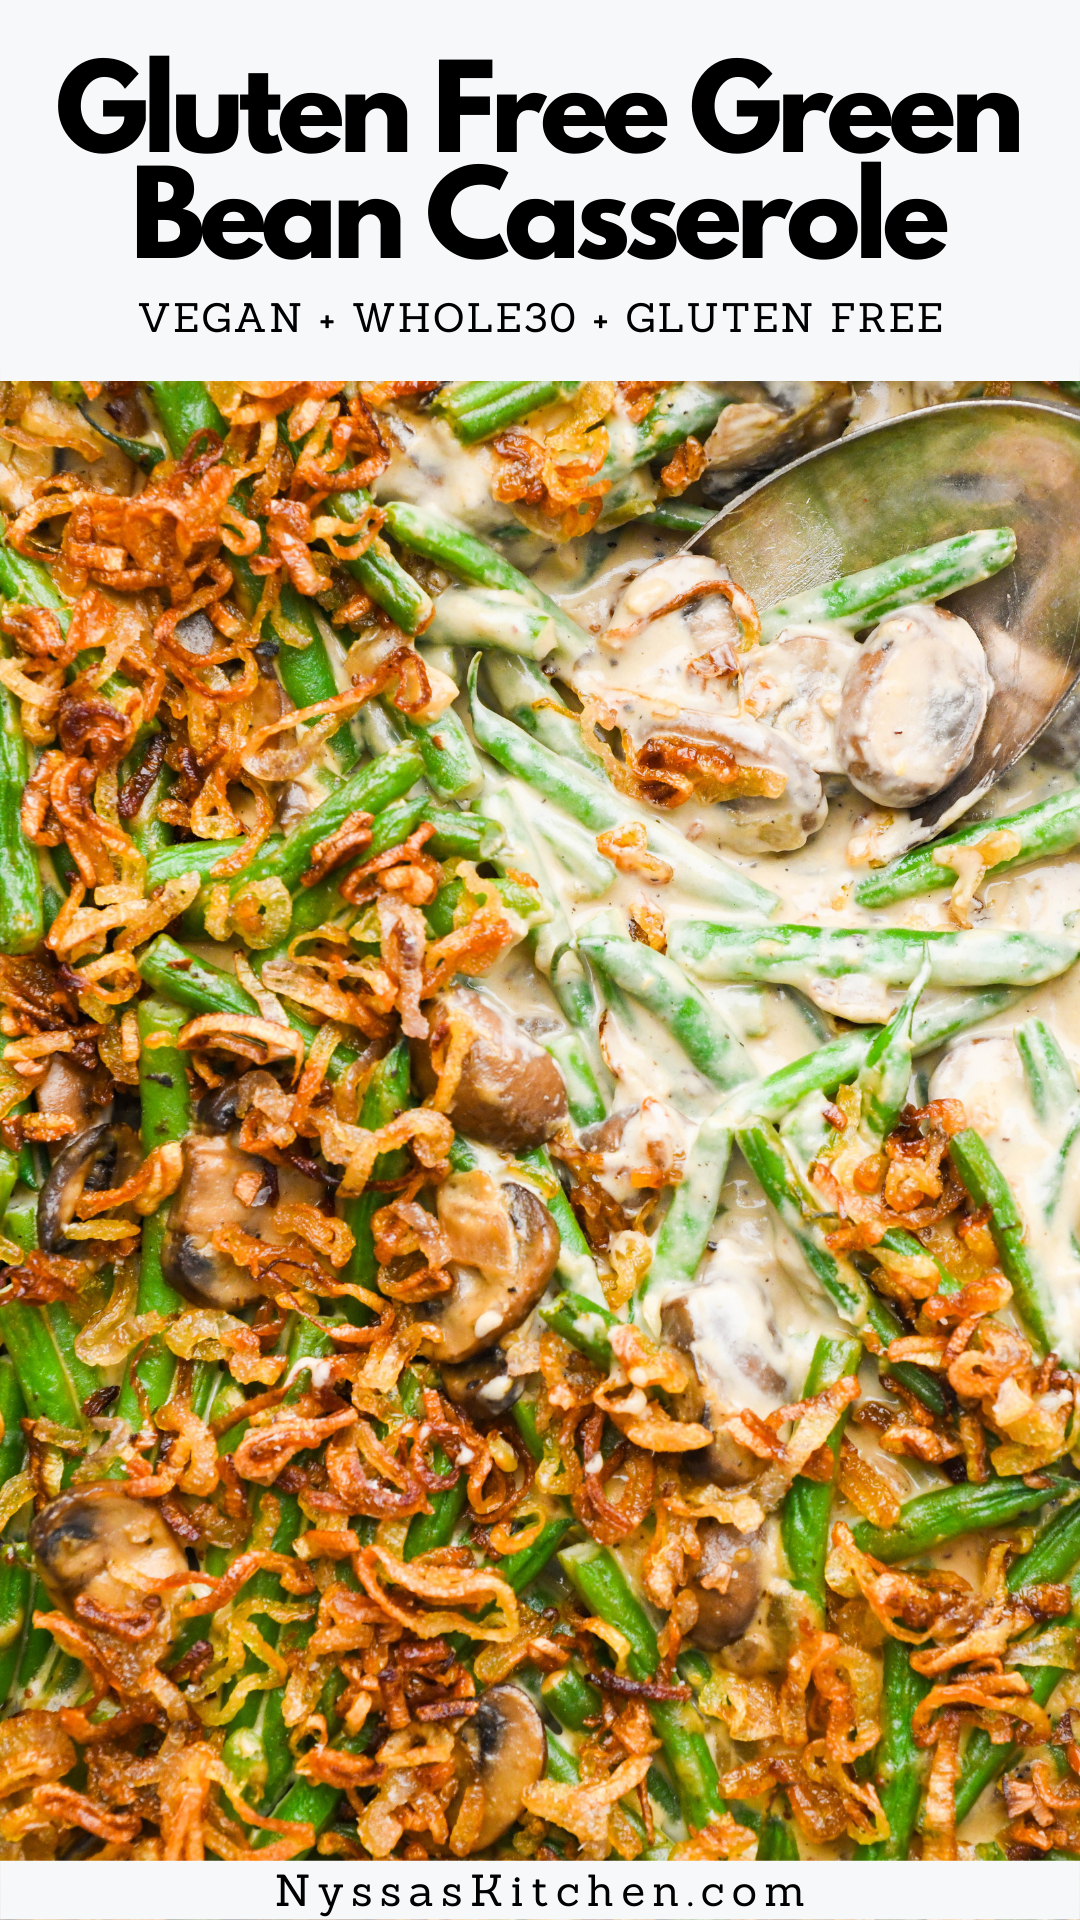 This gluten free green bean casserole is a healthier take on a Thanksgiving classic! Made with fresh green beans, mushrooms, crispy fried shallots, and an ultra creamy sauce that you'd never guess is dairy free. Gluten free, Whole30, vegan, and paleo.